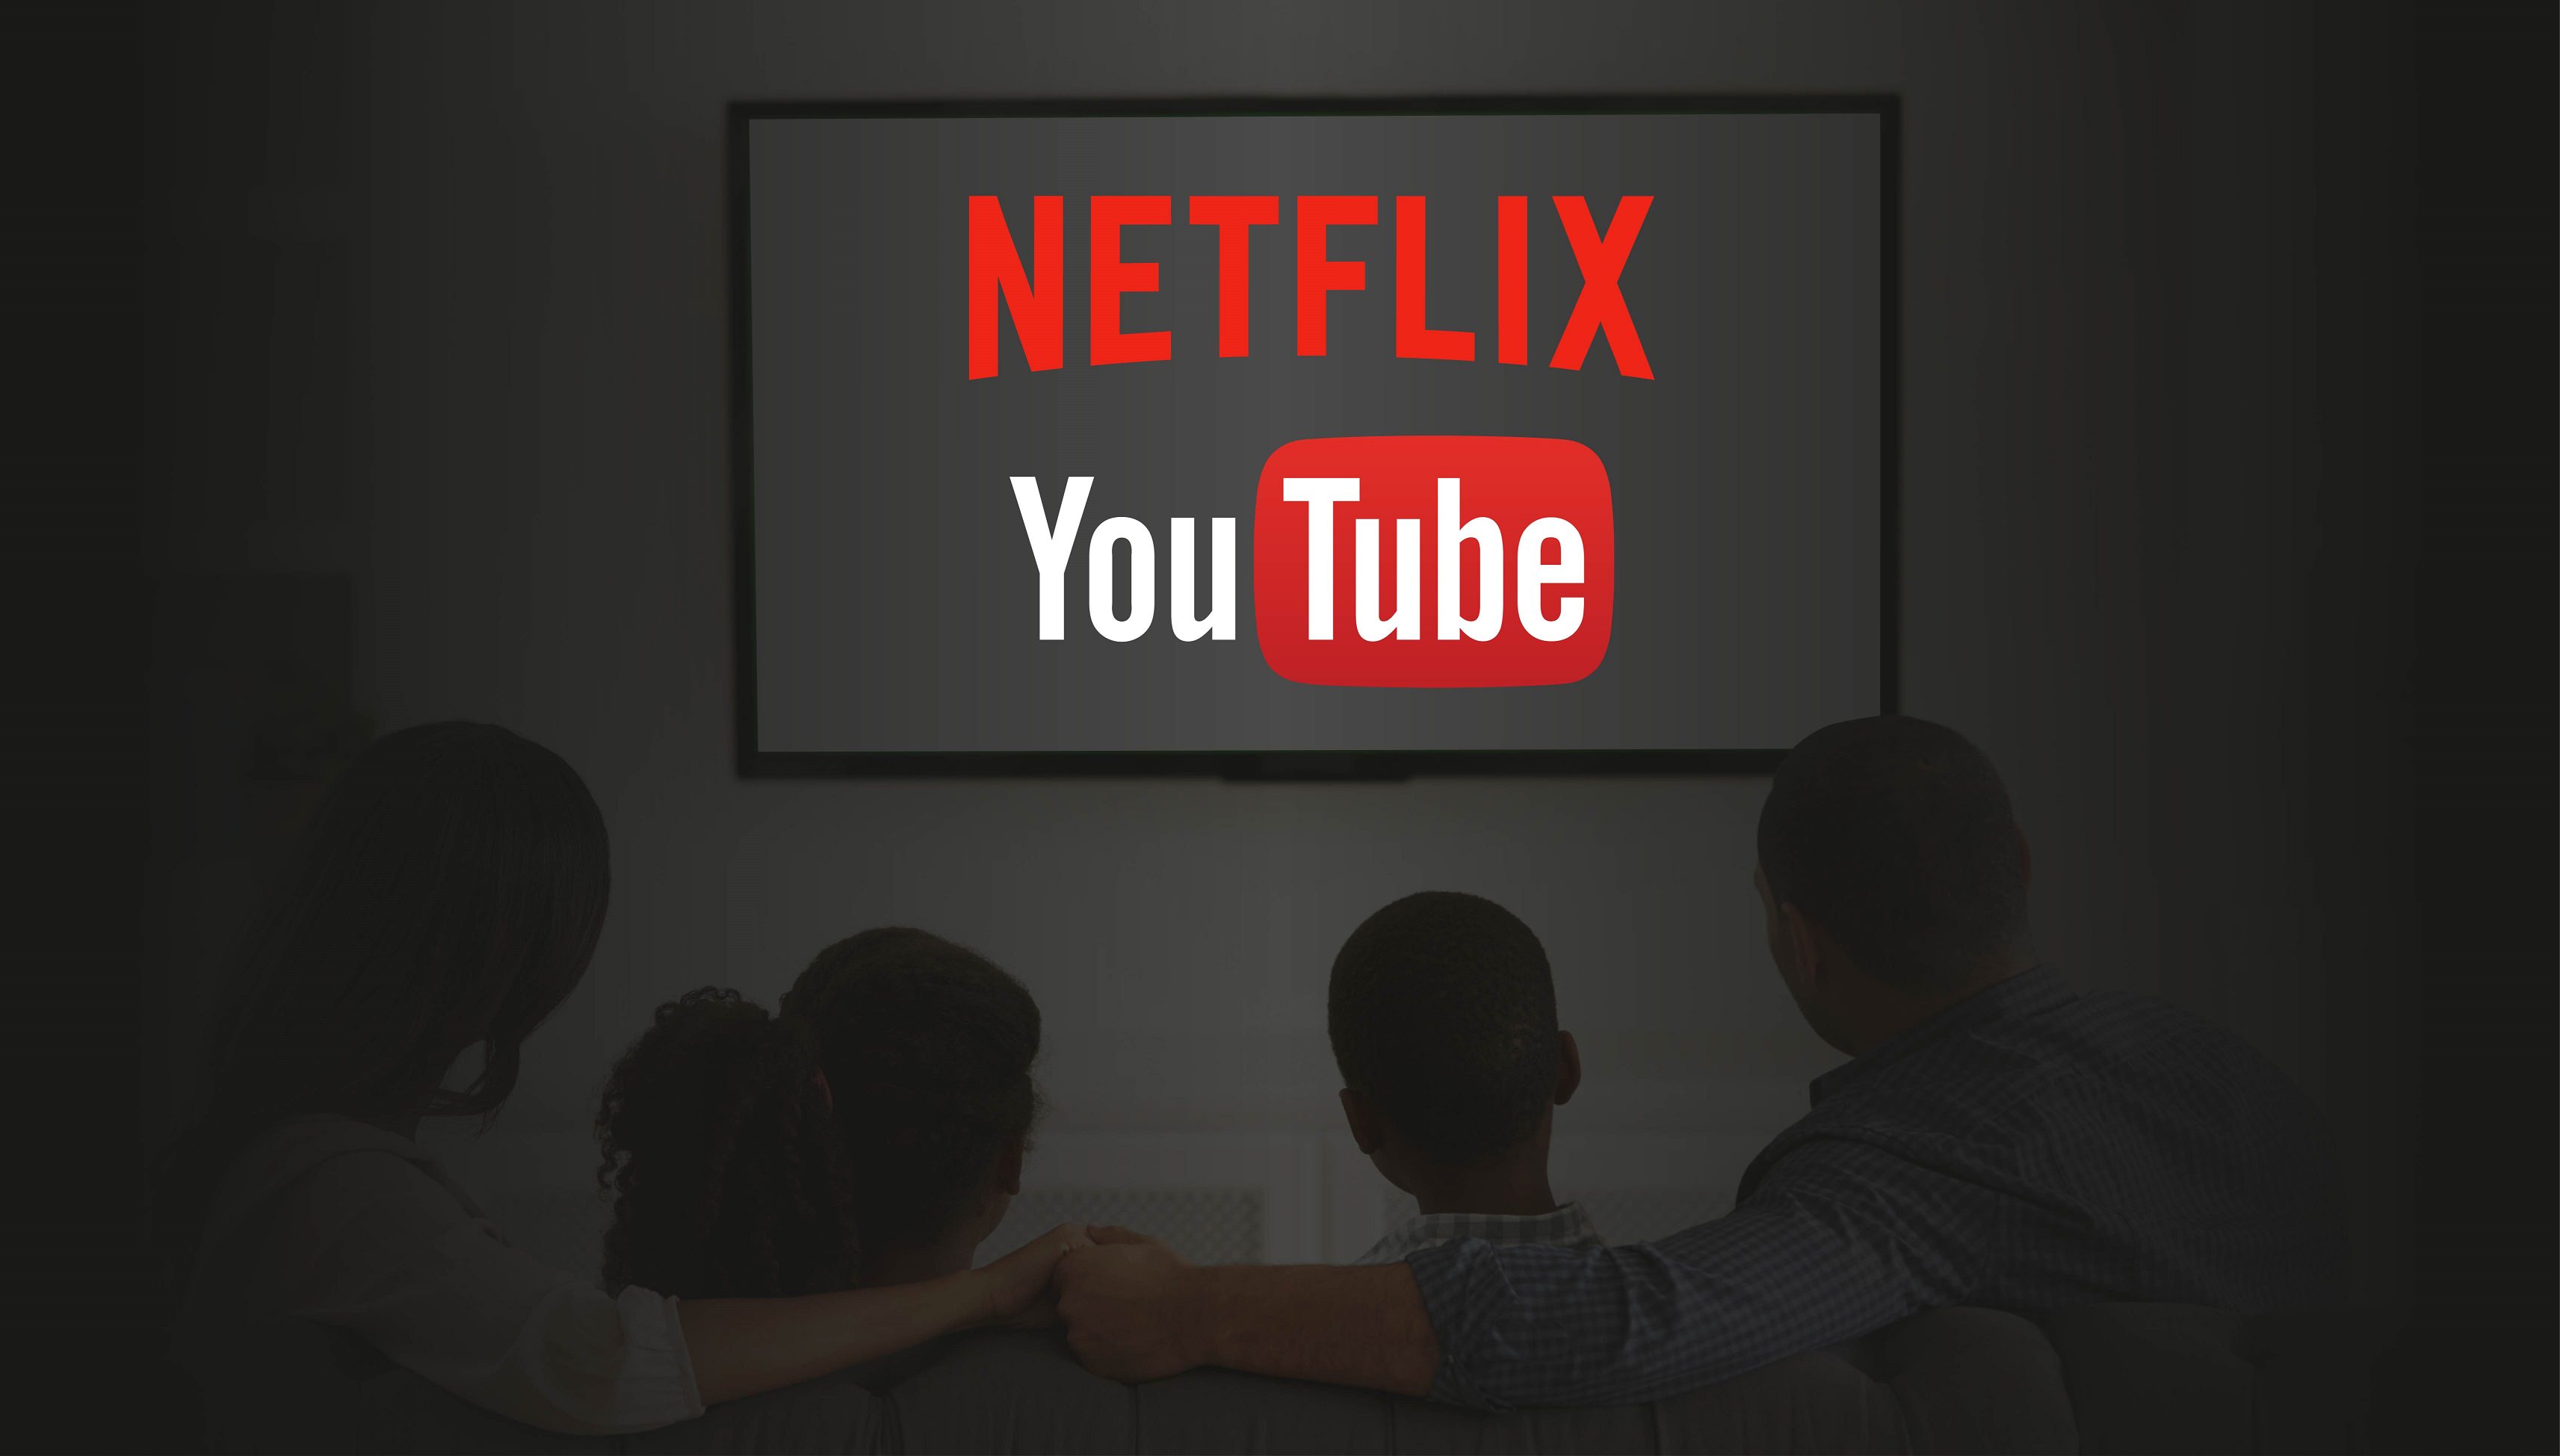 Netflix places 10 free documentary films and docuseries on YouTube